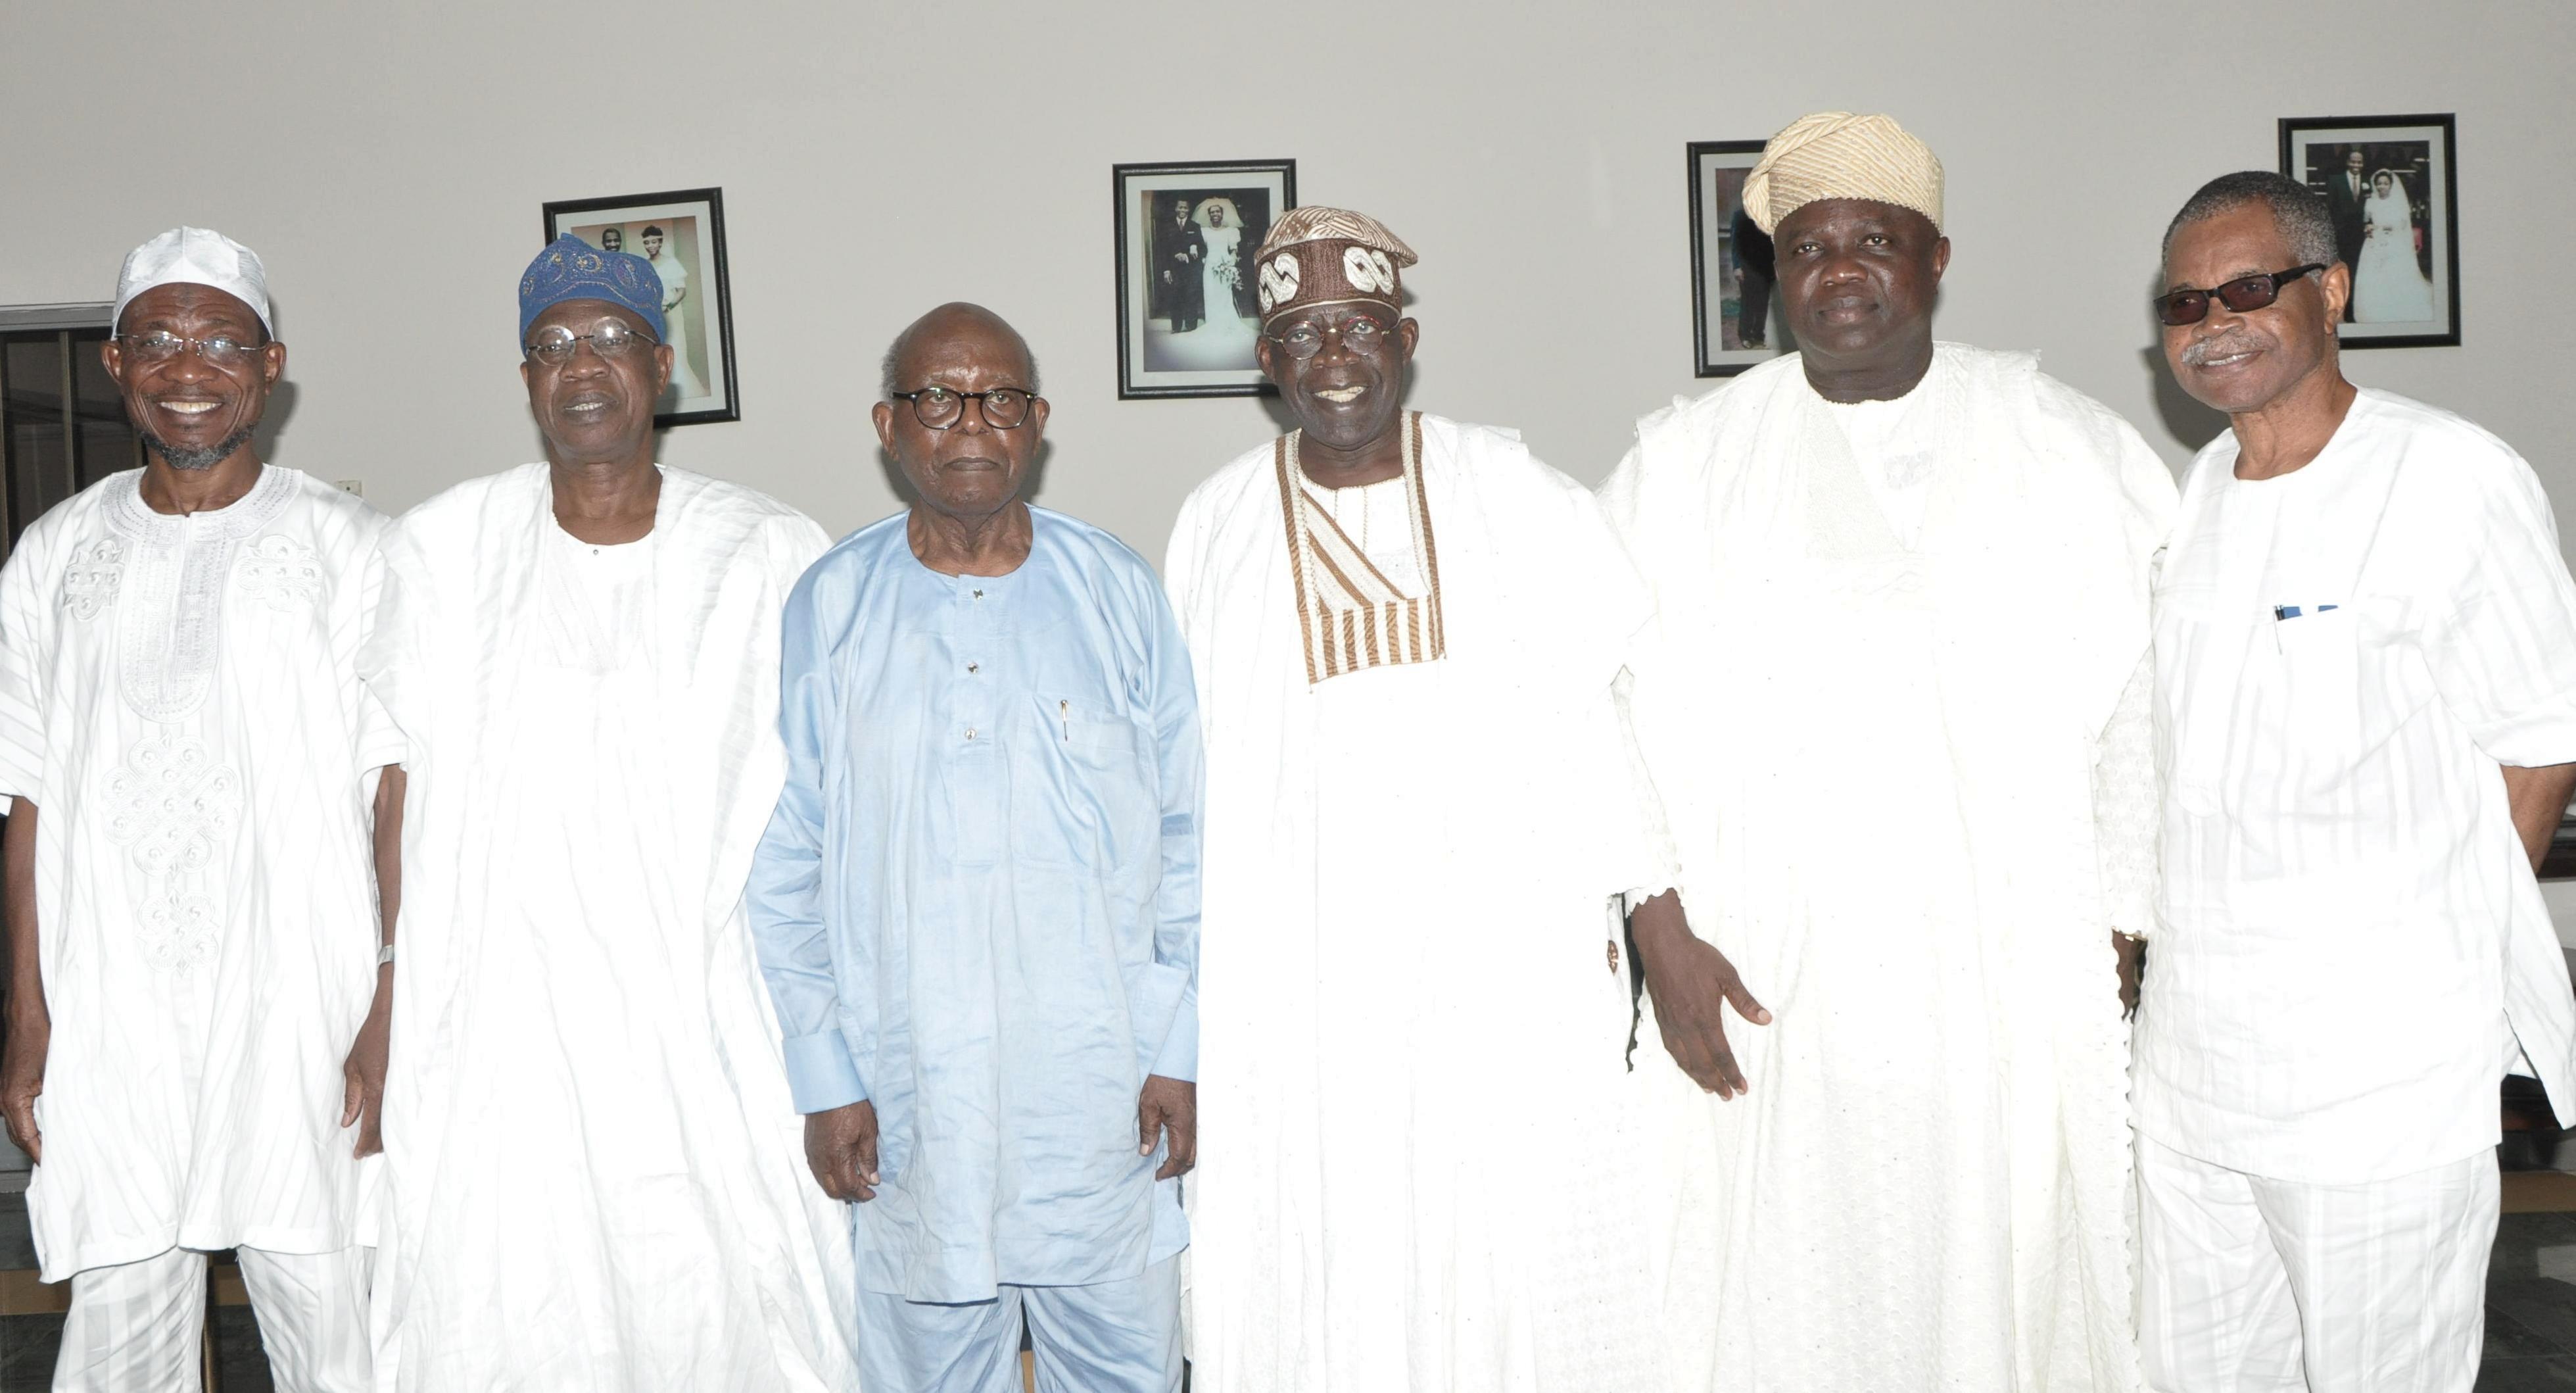 L-R: Lagos State Governor, Mr. Akinwunmi Ambode (2nd right) with his Osun State counterpart, Ogbeni Rauf Aregbesola, National Publicity Secretarty, All Progressives Congress (APC), Alhaji Lai Mohammed, Afenifere Leader, Pa Olaniwun Ajayi, National Leader, APC, Asiwaju Bola Tinubu and Vice Chairman, South West APC, Chief Pius Akinyelure during a courtesy visit to Pa Olaniwun at his Ijebu-Ishara residence in Ogun State, on Sunday, September 20, 2015.